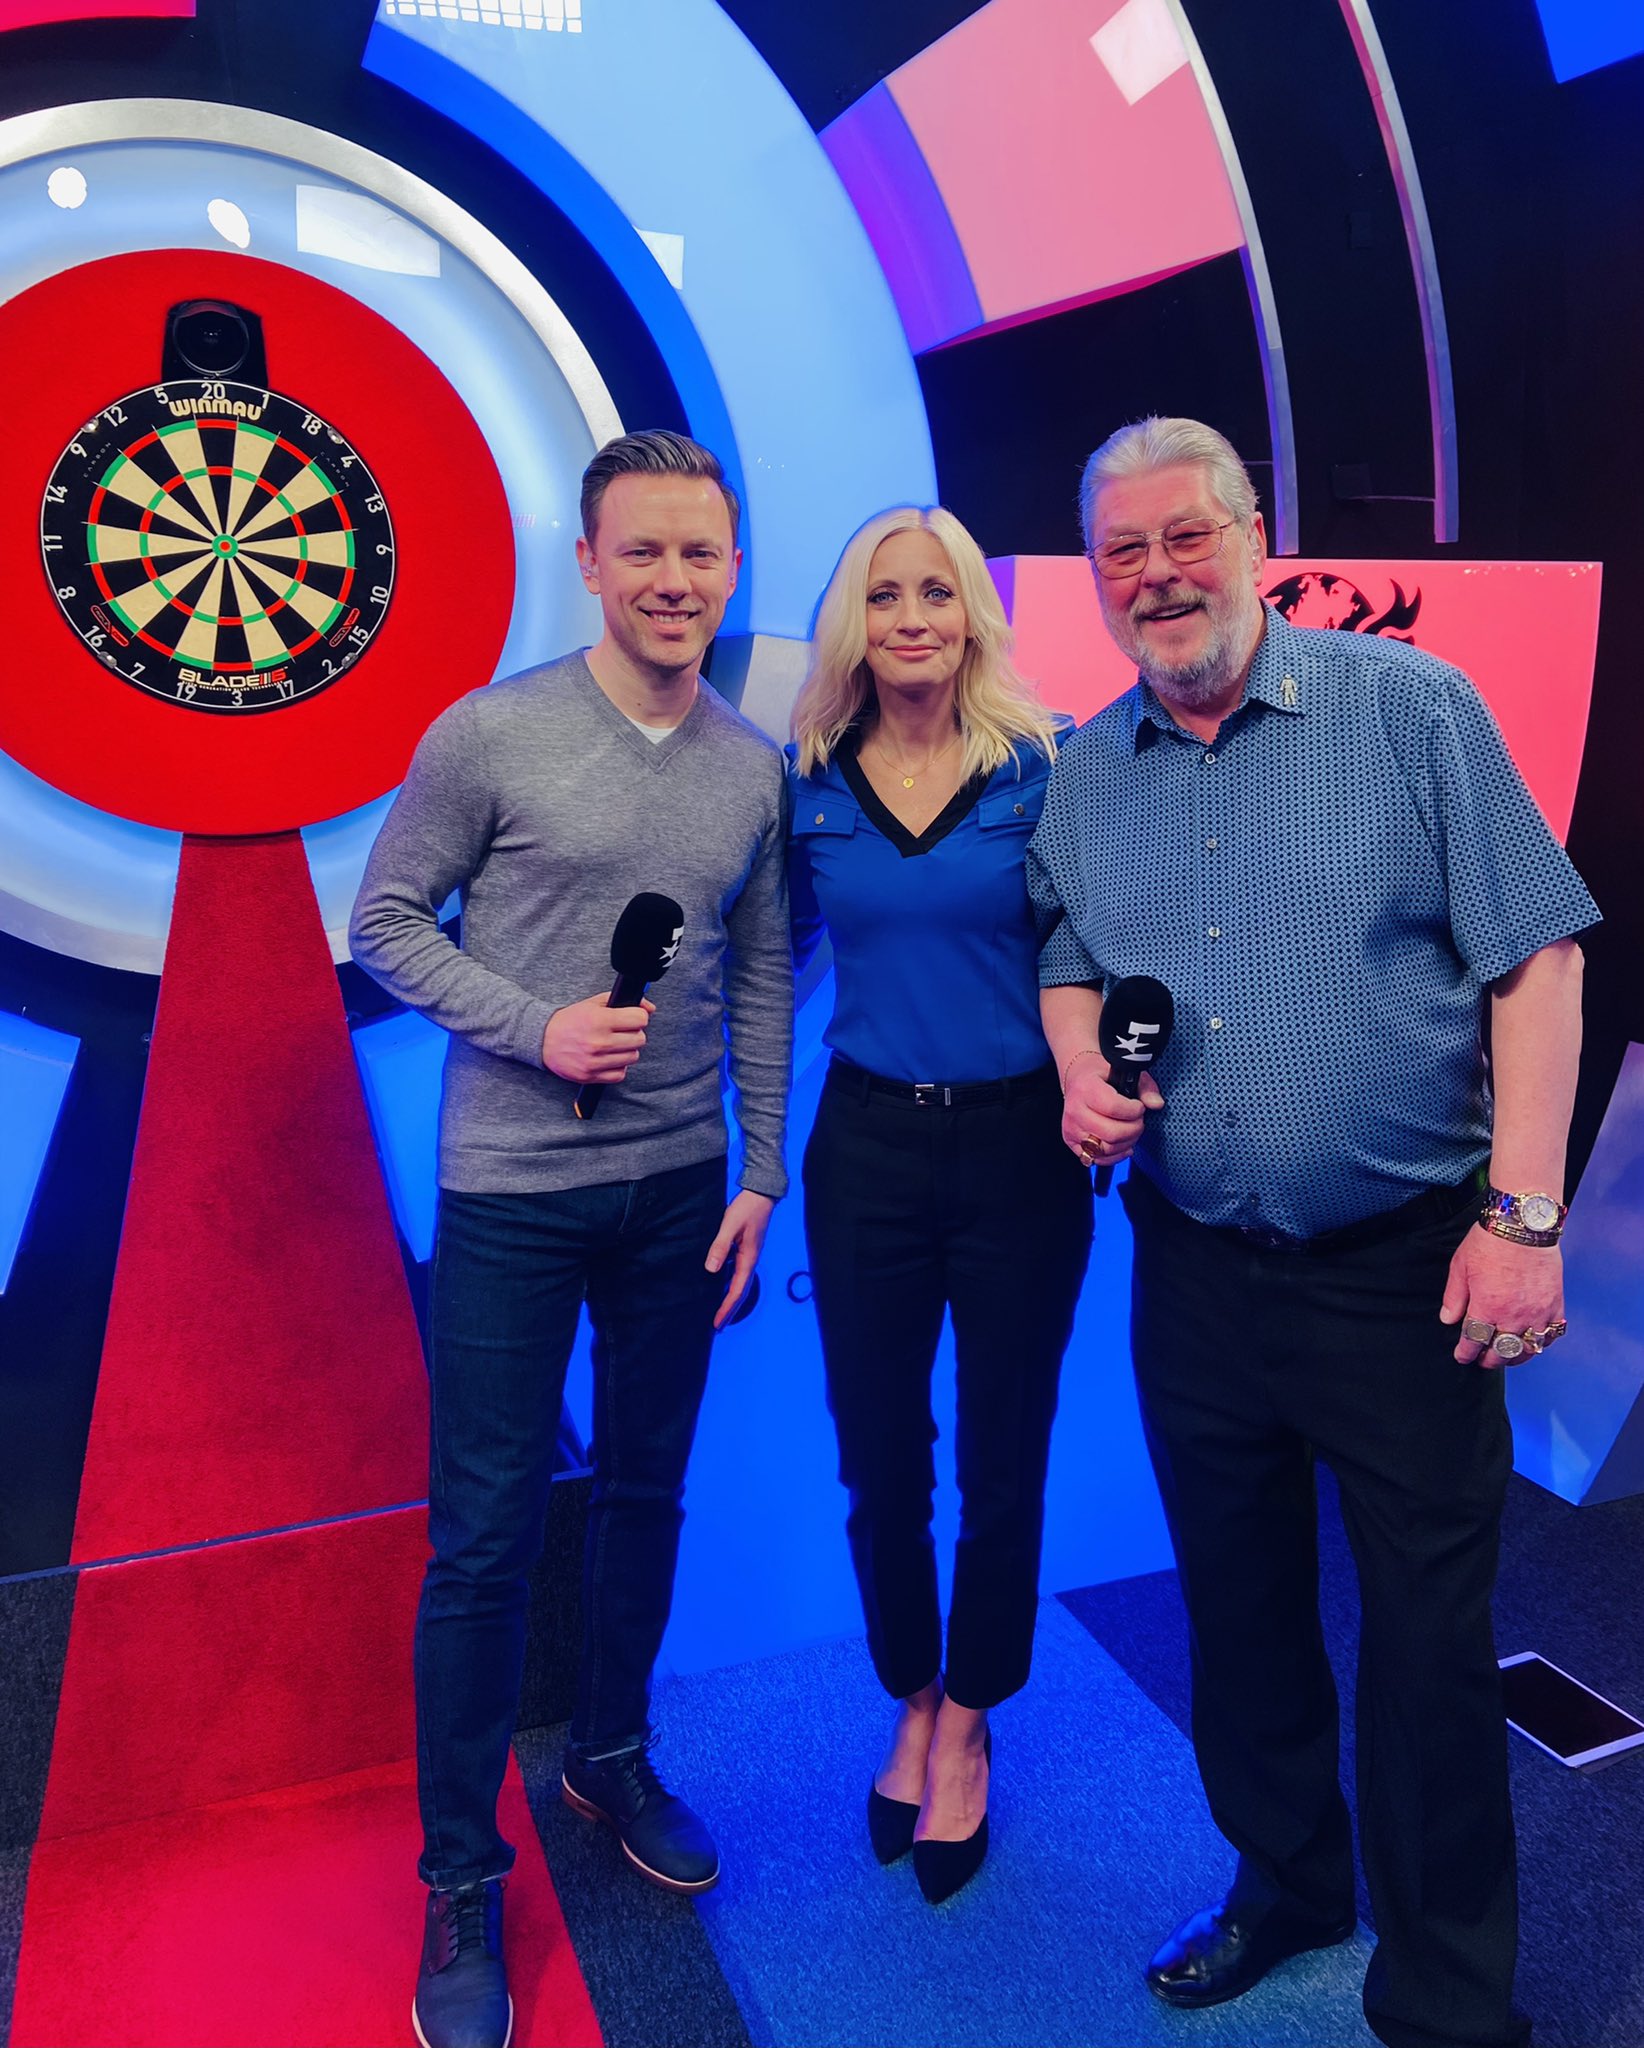 Lynsey Hipgrave Twitter: "Day 3 at the Lakeside with @wolfiedarts and @TheAsset180 as the seeded players enter the draw at the @DartsWDF World Championship. We are live @eurosport and @discoveryplus.